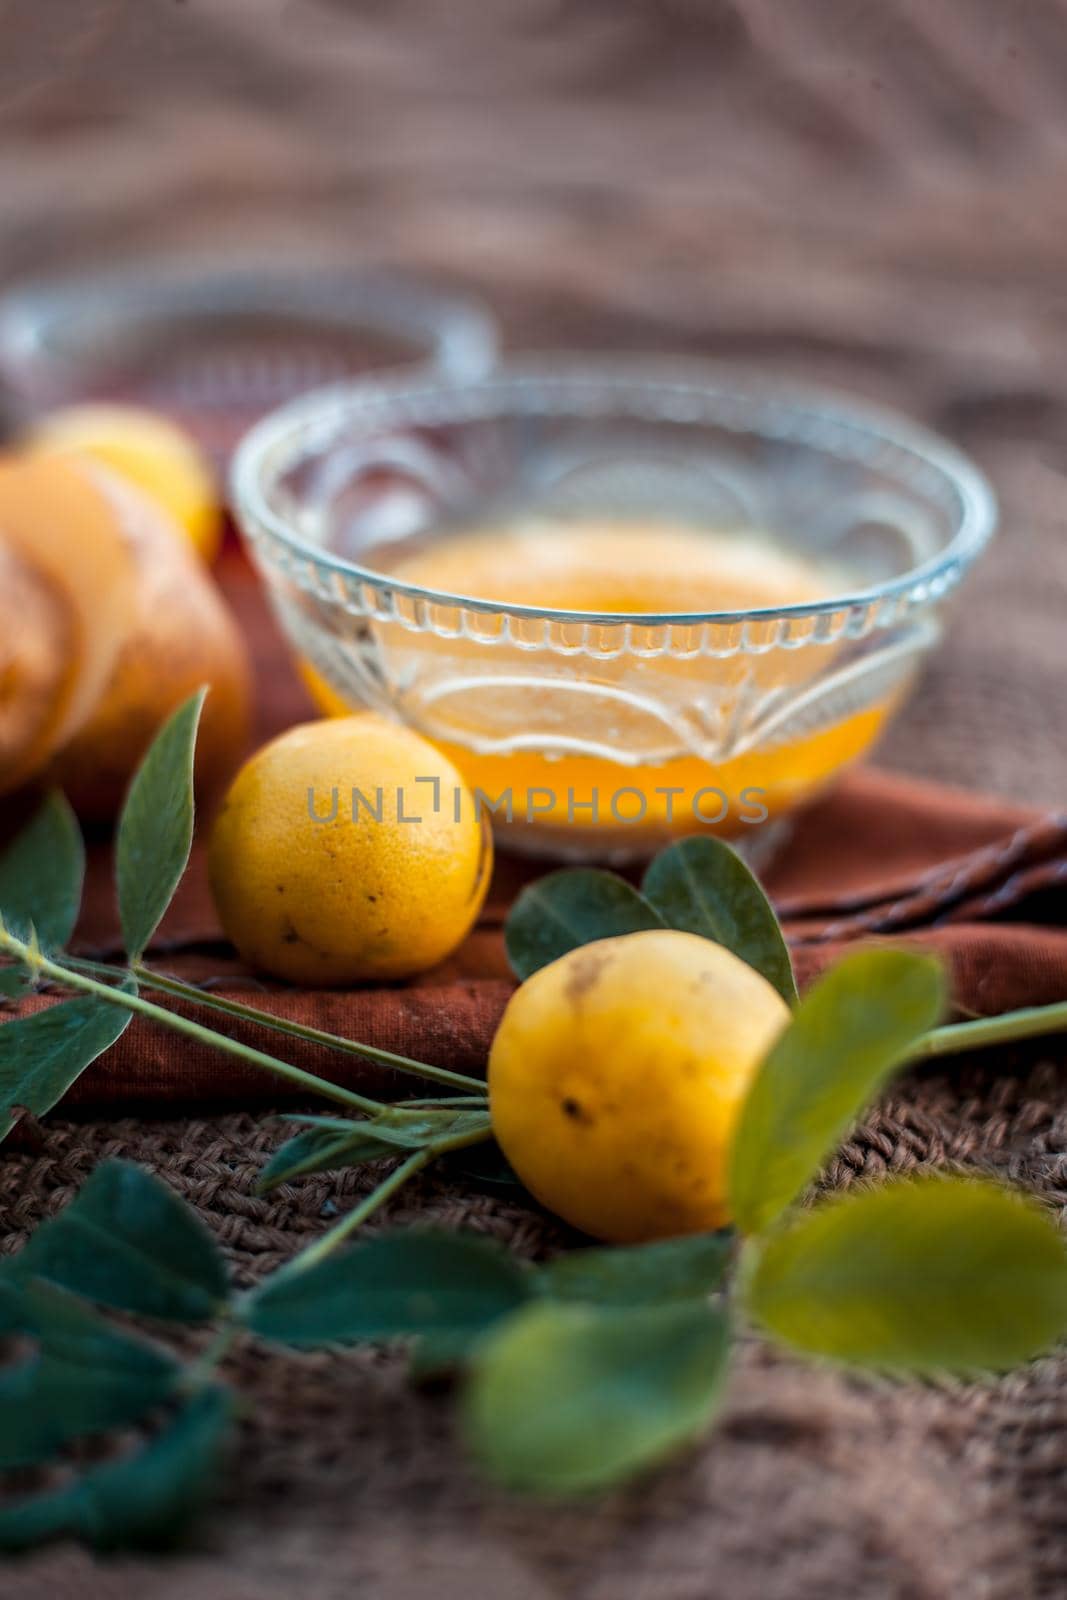 Glowing face mask of potato juice in a glass bowl on brown colored surface along with some lemon juice,potato juice and honey.Horizontal shot.